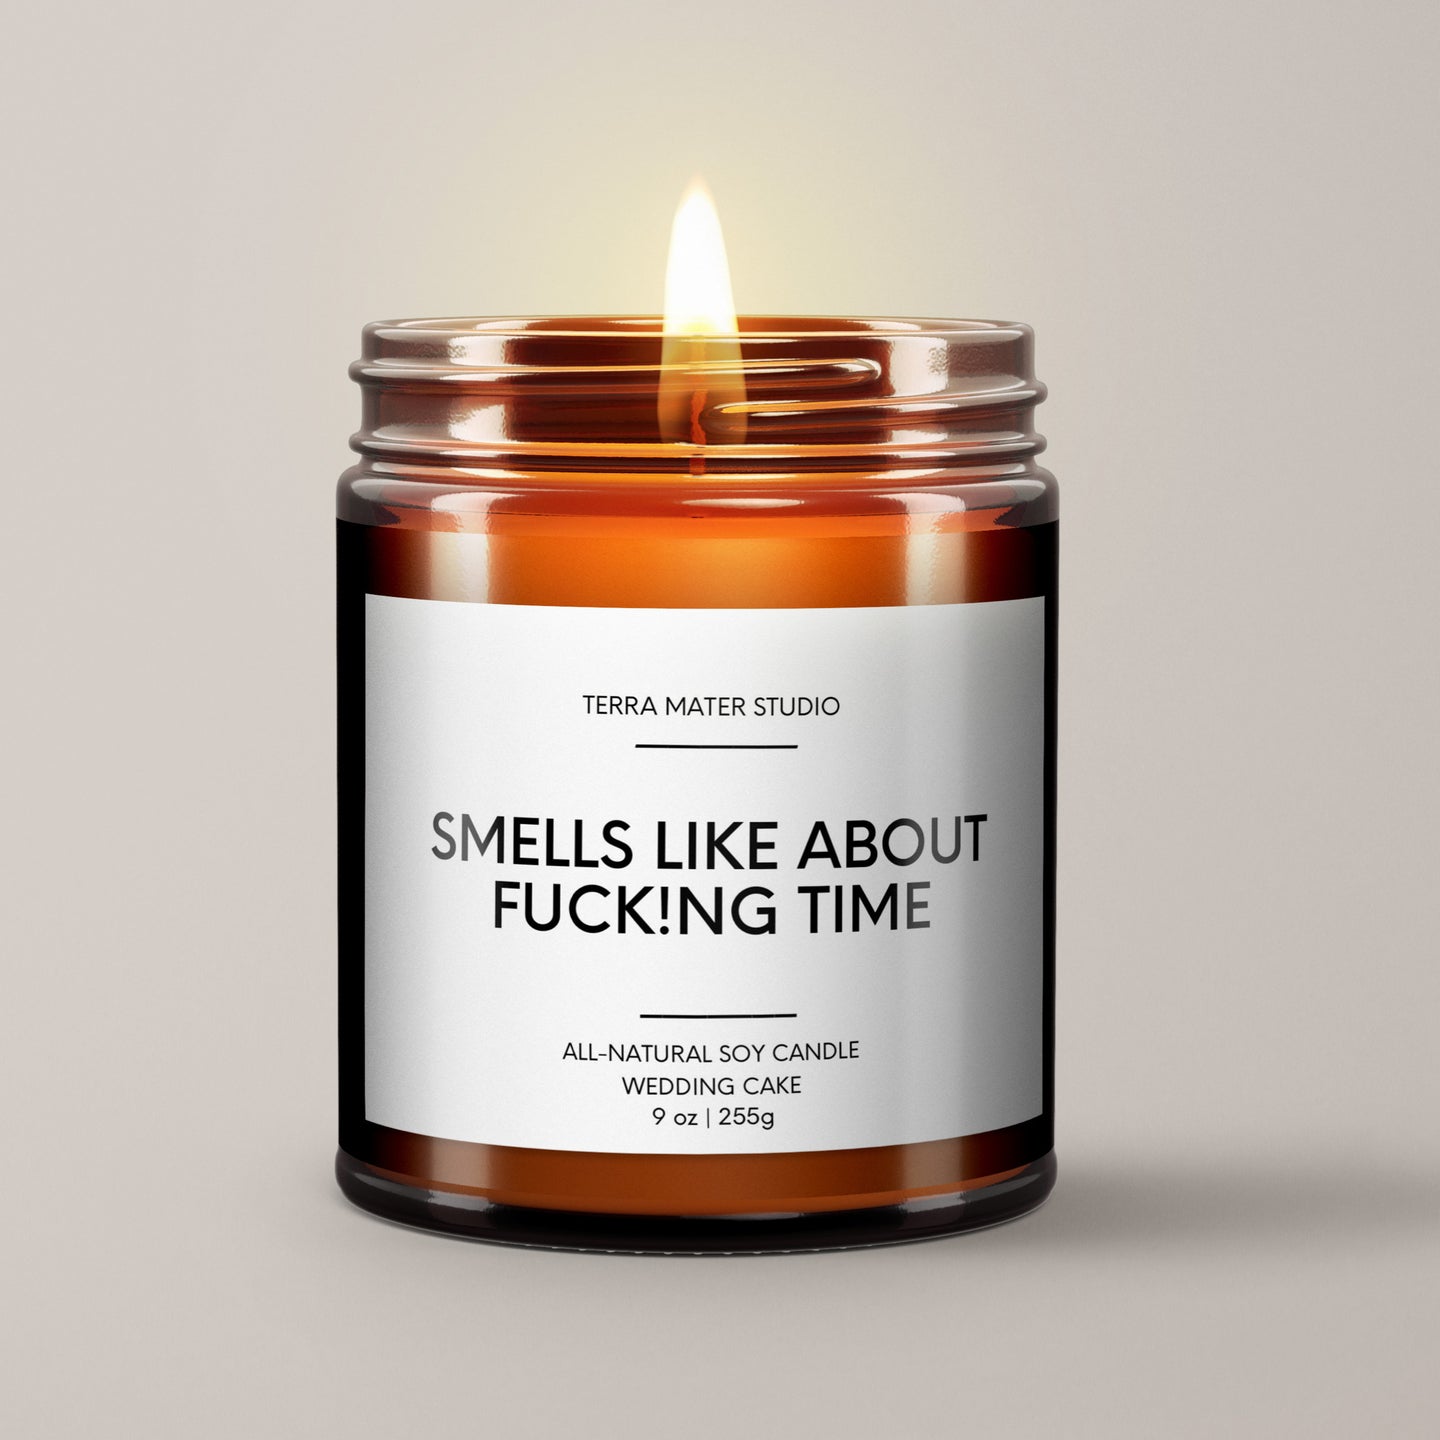 Smells Like About Fuck!n Time Soy Wax Candle | Engagement Gift